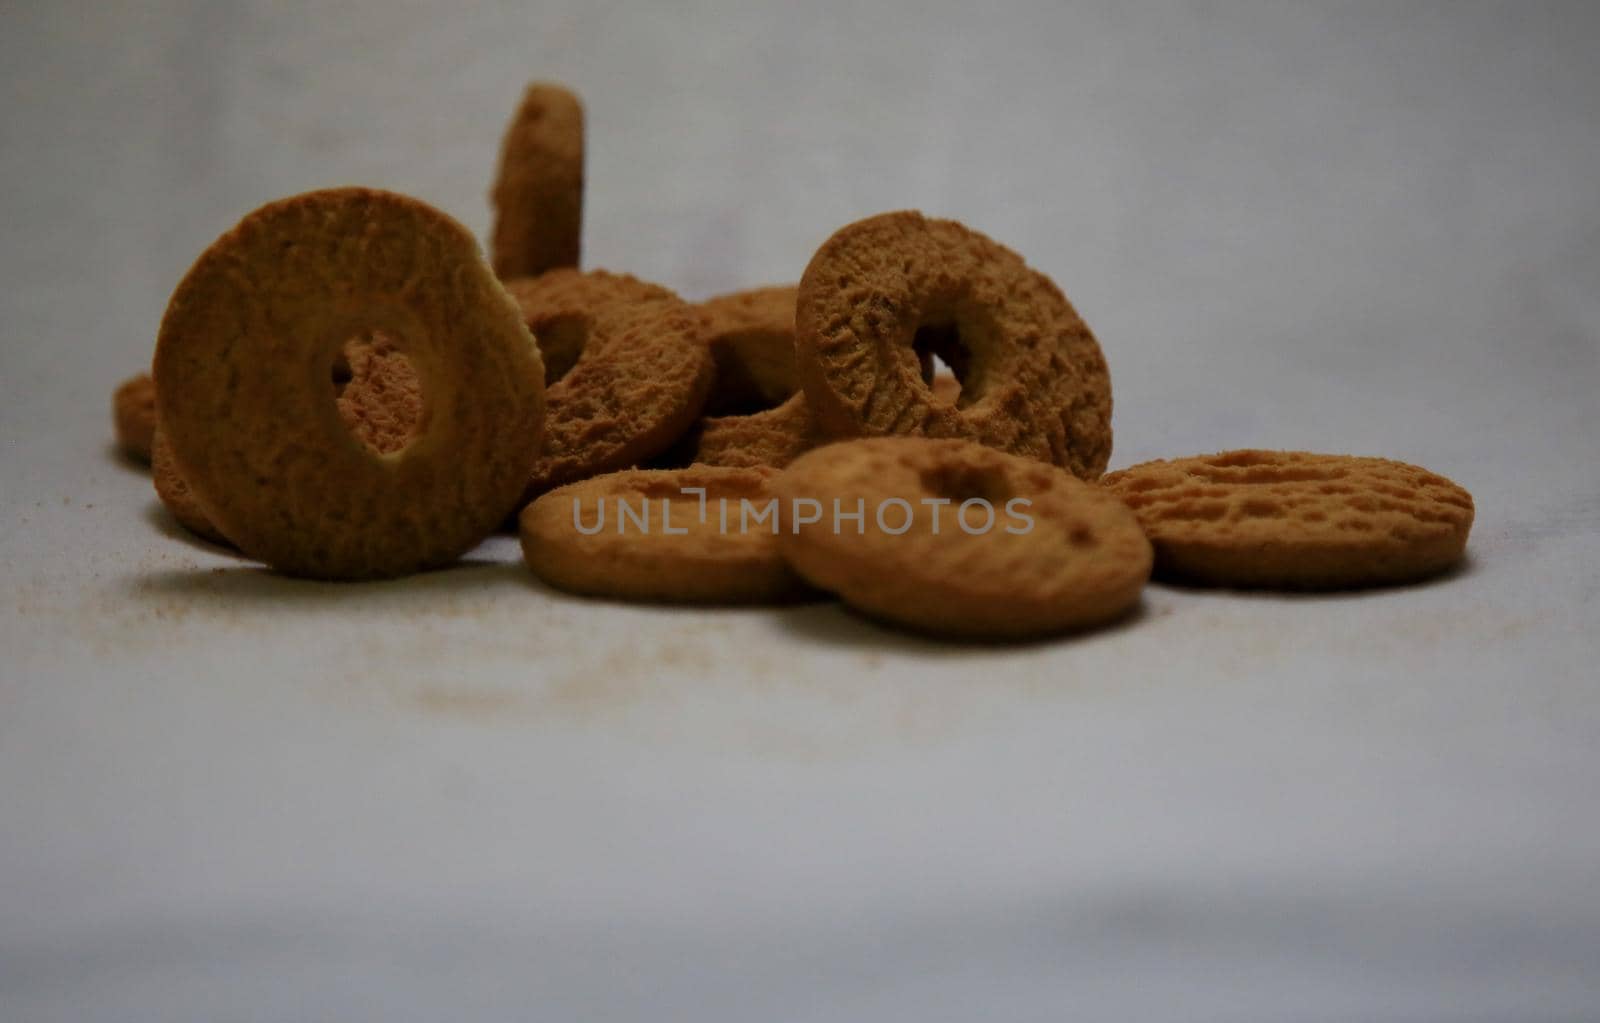 salvador, bahia / brazil - may 17, 2020: donut cookies are seen in the city of Salvador.
